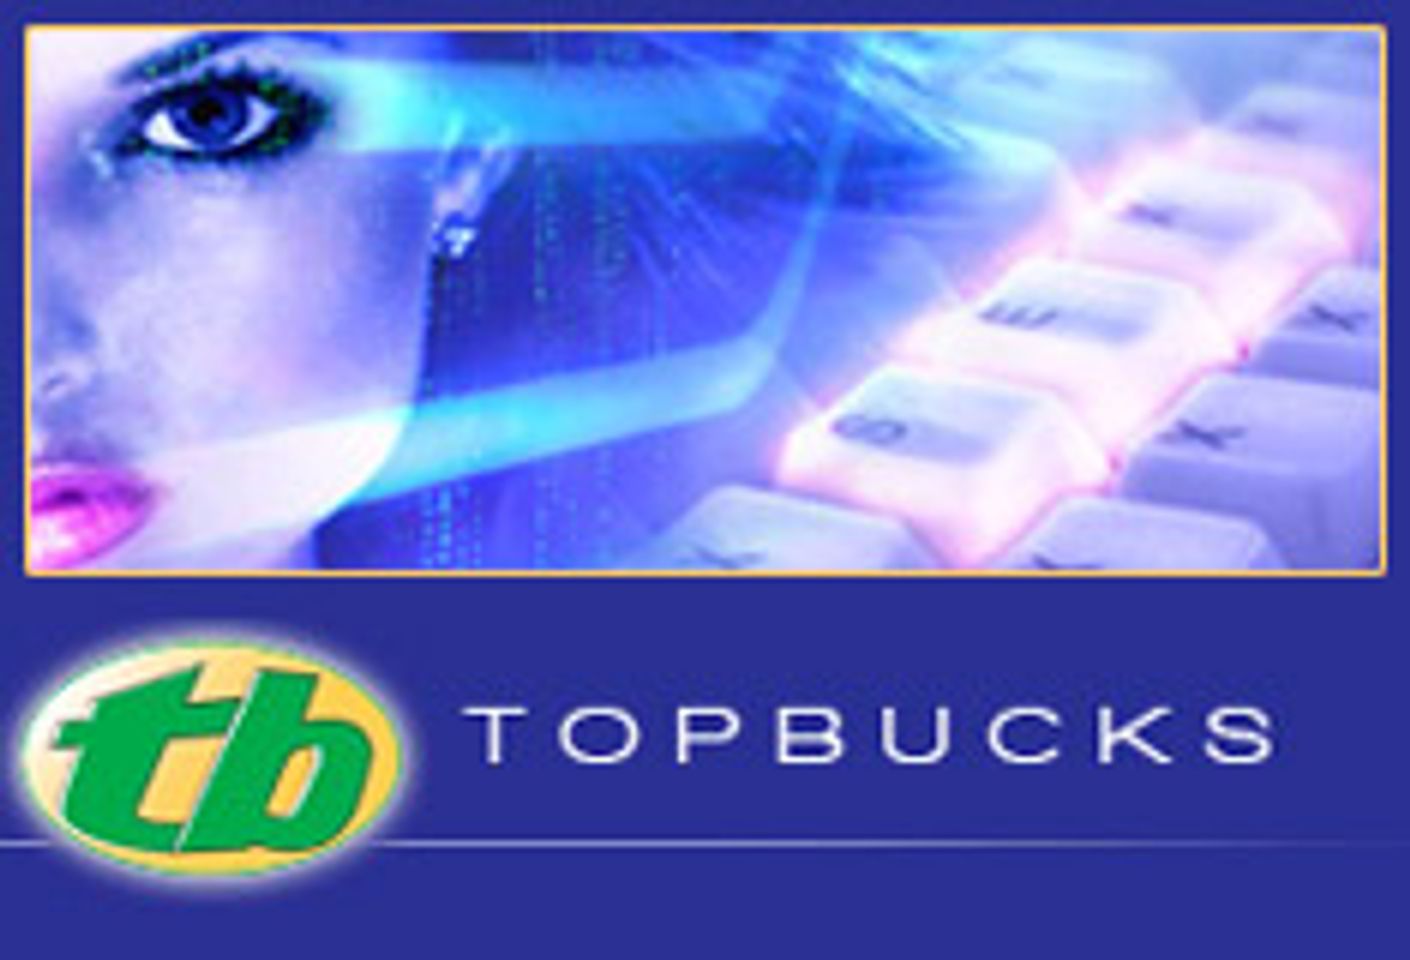 TopBucks Releases Static Hosted Galleries